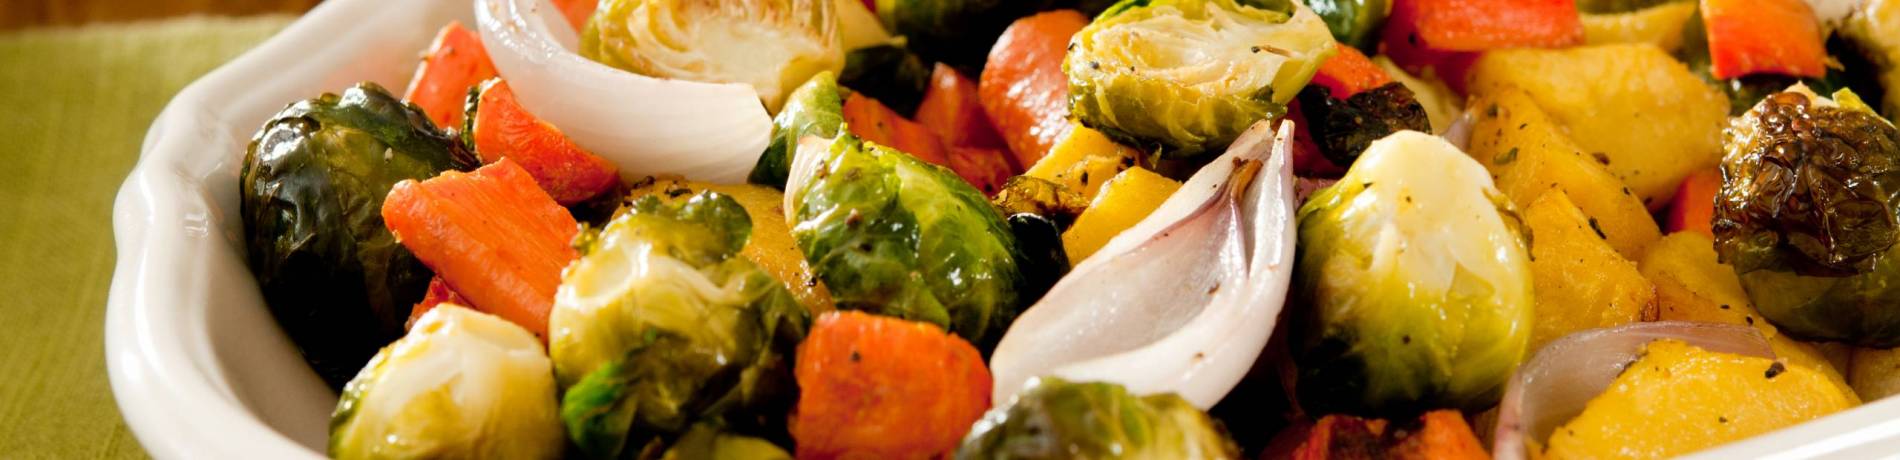 Roasted brussel sprouts with carrots